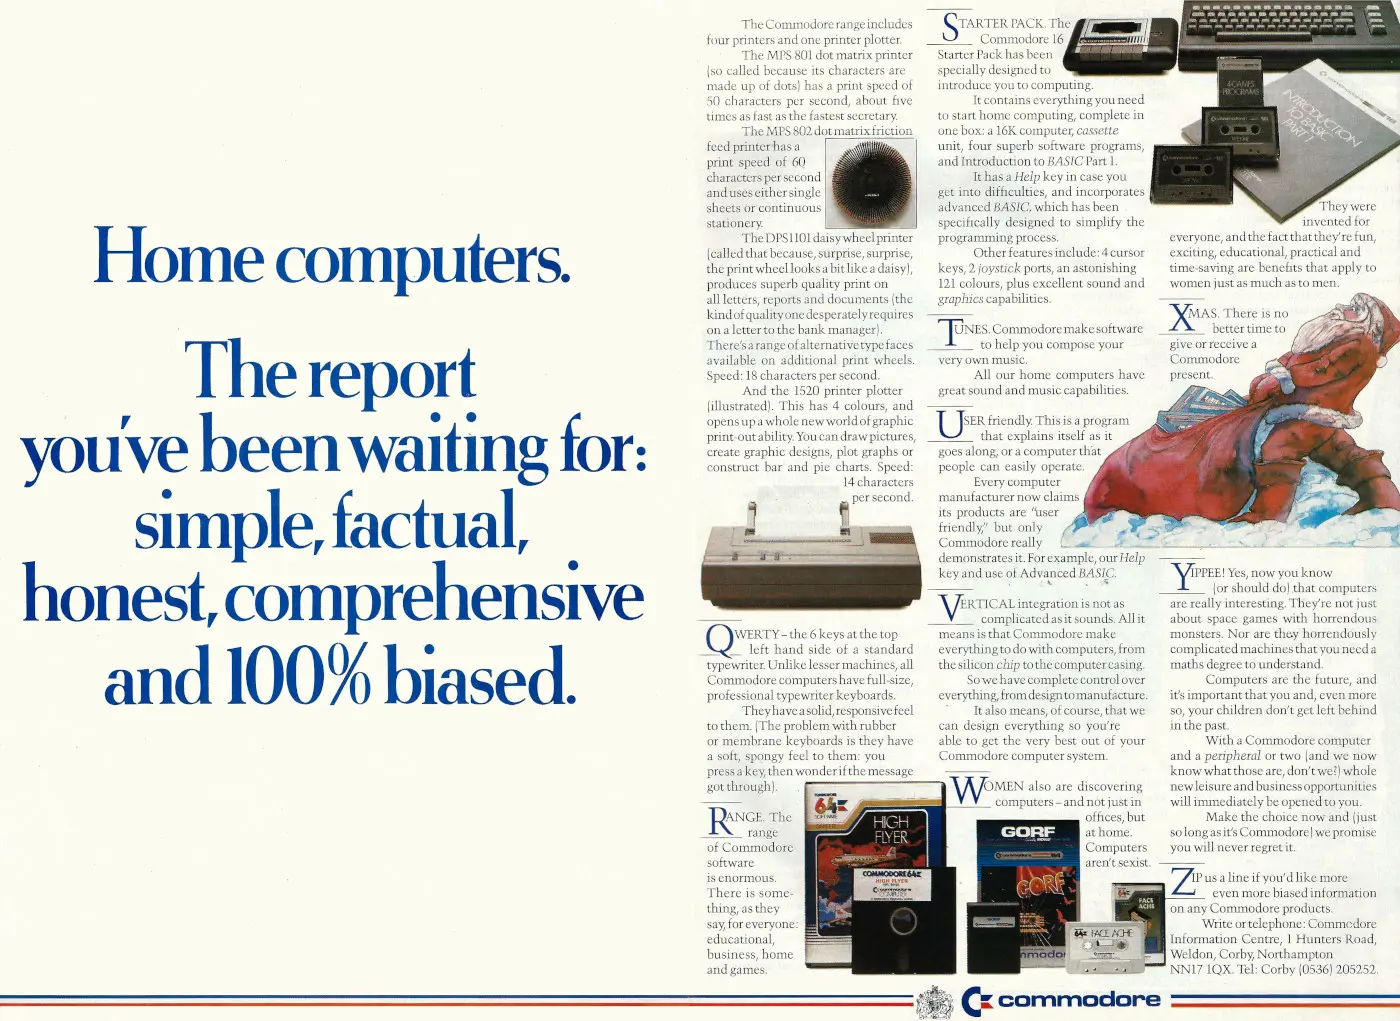 Commodore Advert: The report you are waiting for: simple, factual, honest and 100% biased, from Personal Computer World, December 1984